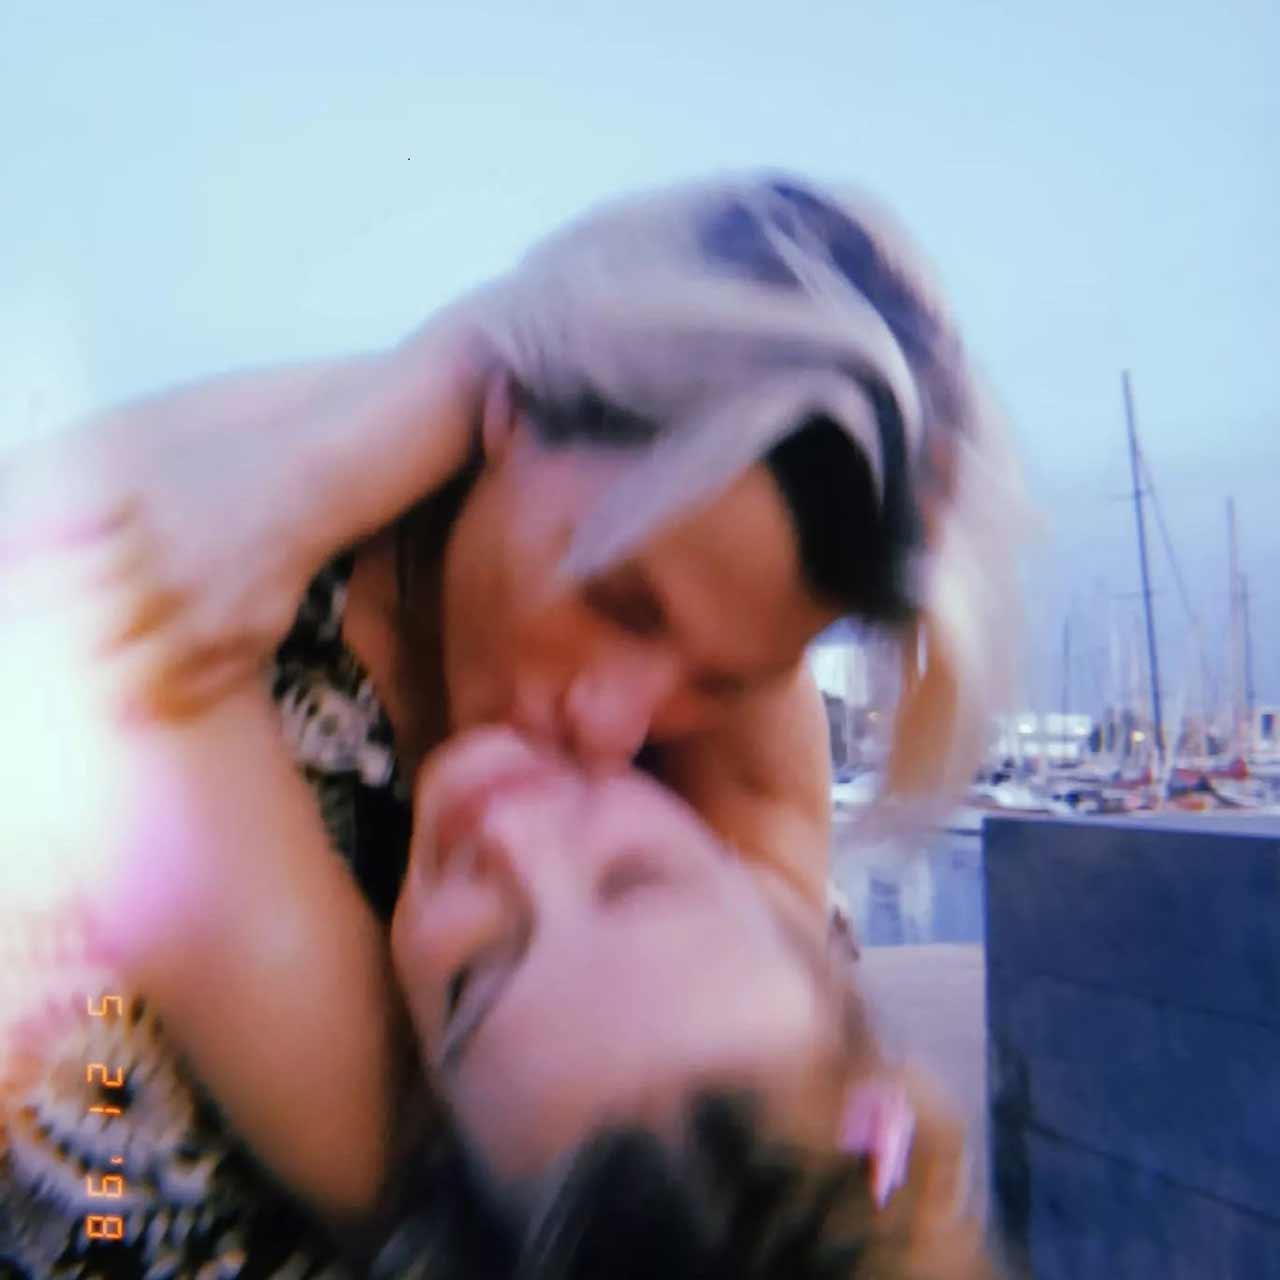 Speaking about her professional life, Millie Bobby Brown is reportedly in a relationship with actor Jake Bongiovi, son of Jon Bon Jovi and Dorothea Hurley. Their social media posts are filled with loved-up photos, and we can't get over this cute couple.